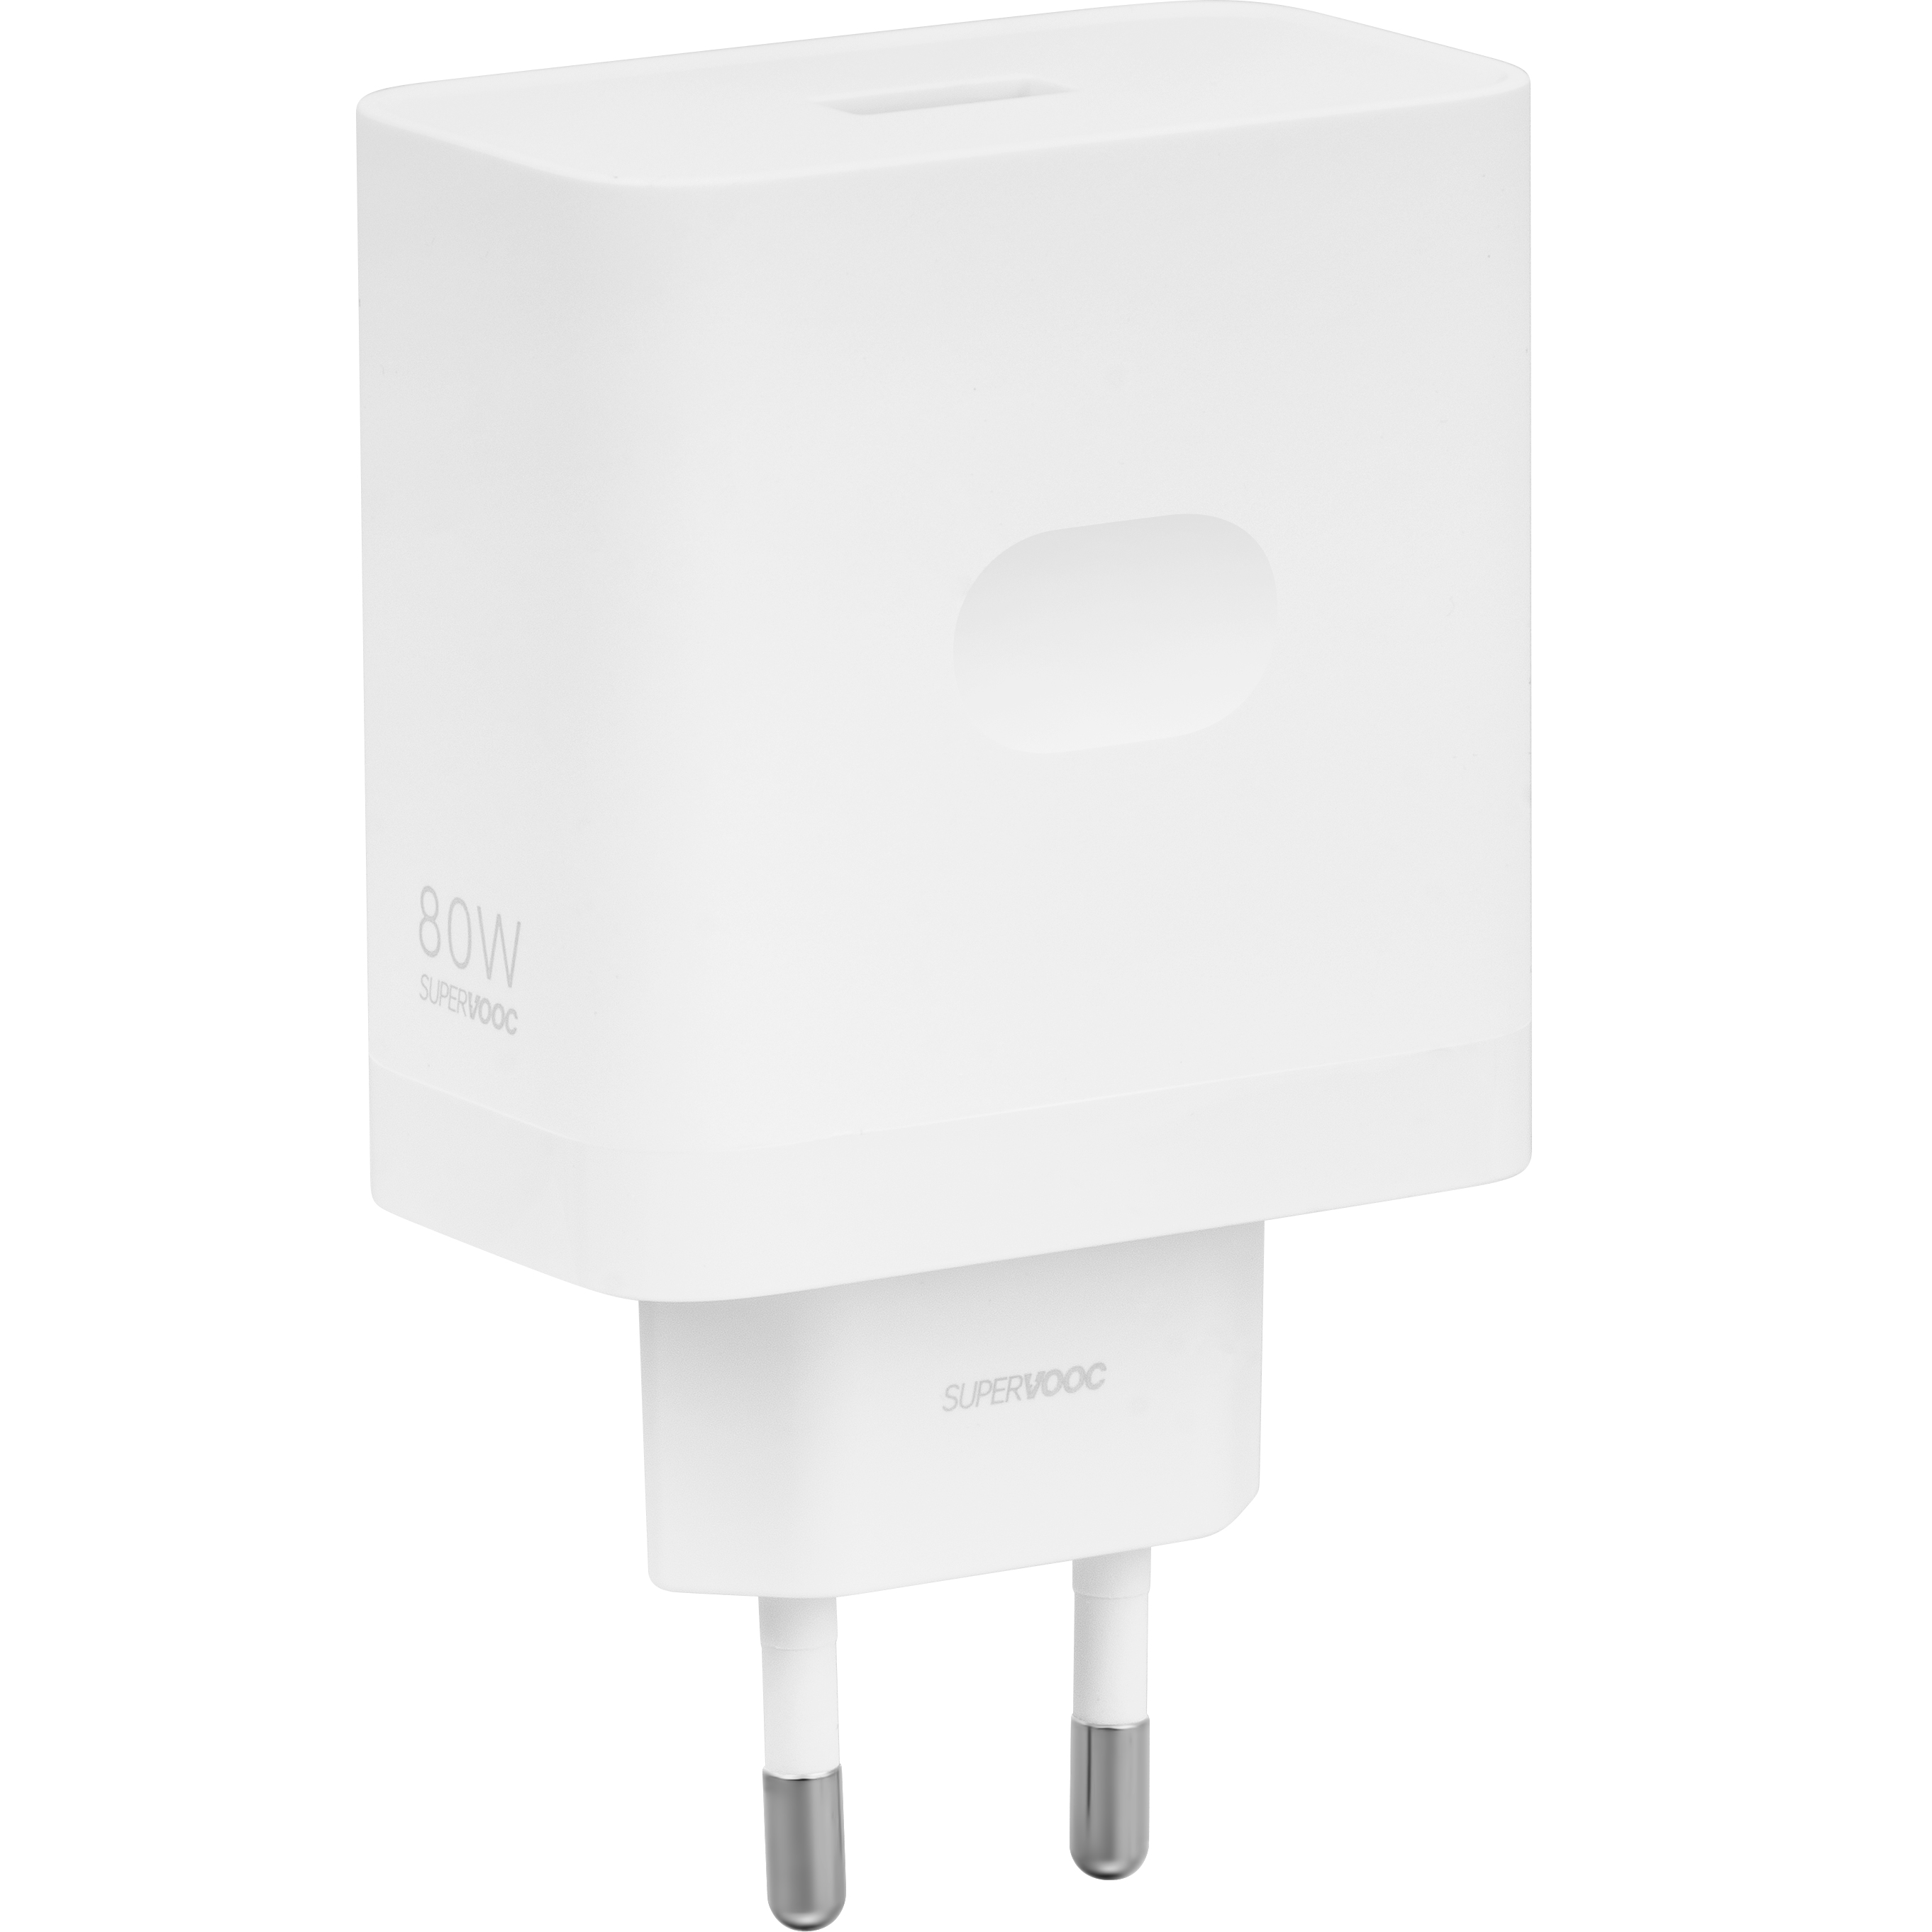 wall-charger-oppo-2C-quick-charge-2C-80w-2C-1x-usb-2C-white-5474220--28service-pack-29